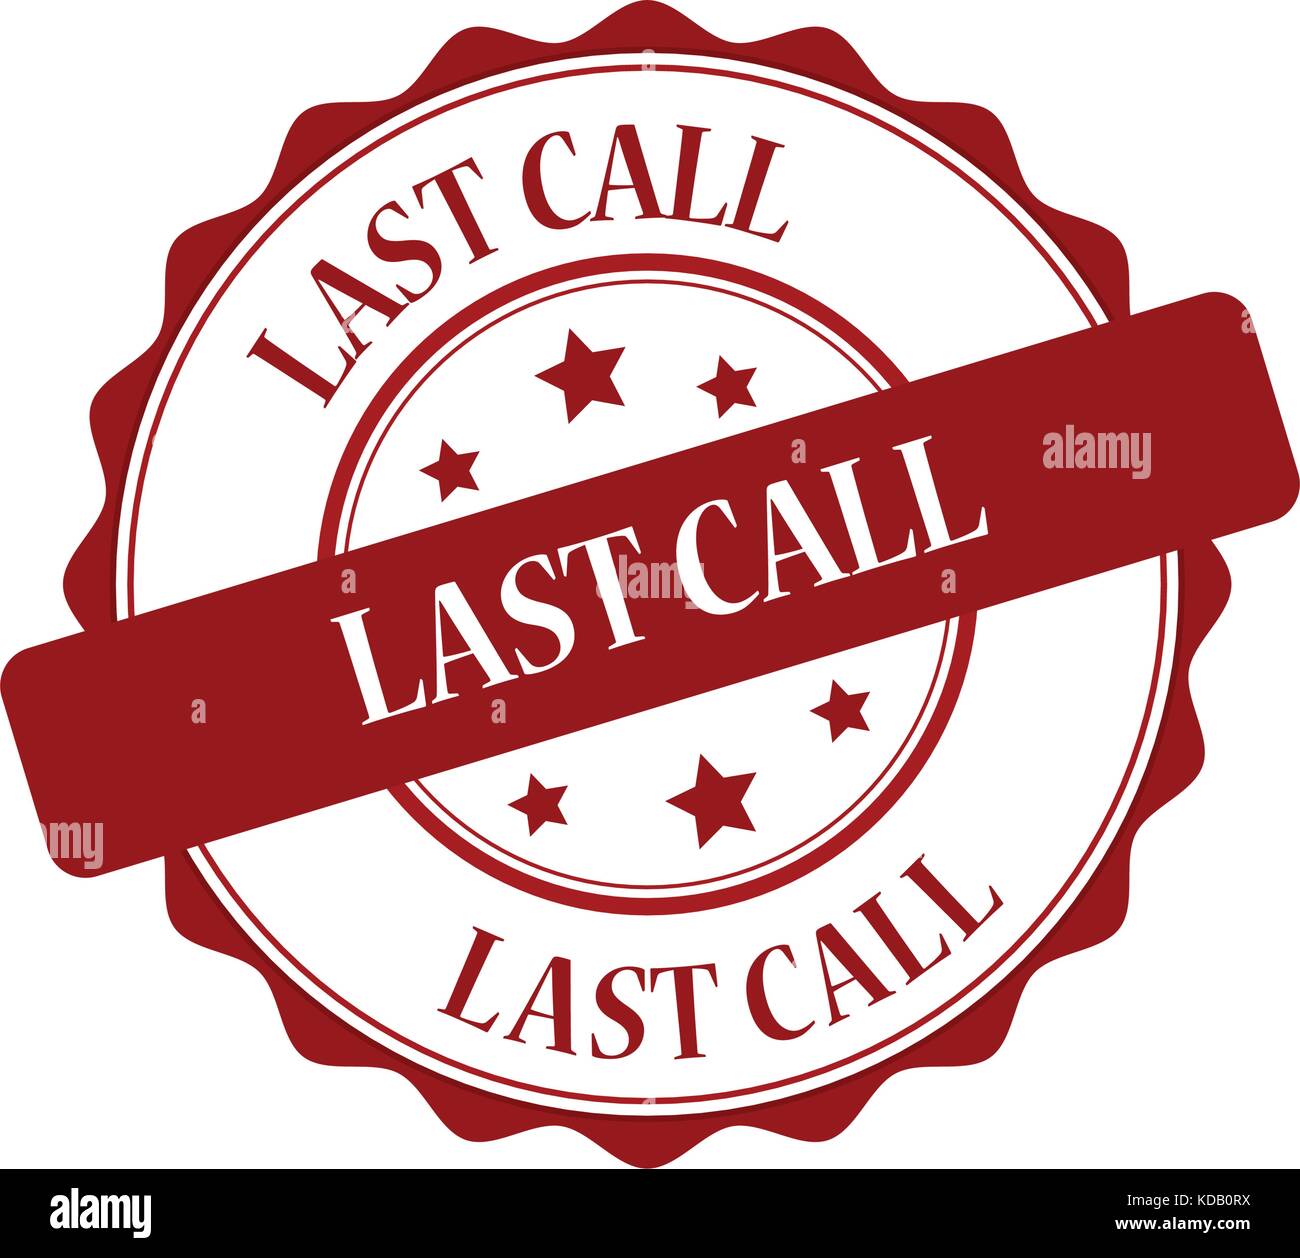 Last call red stamp illustration Stock Vector